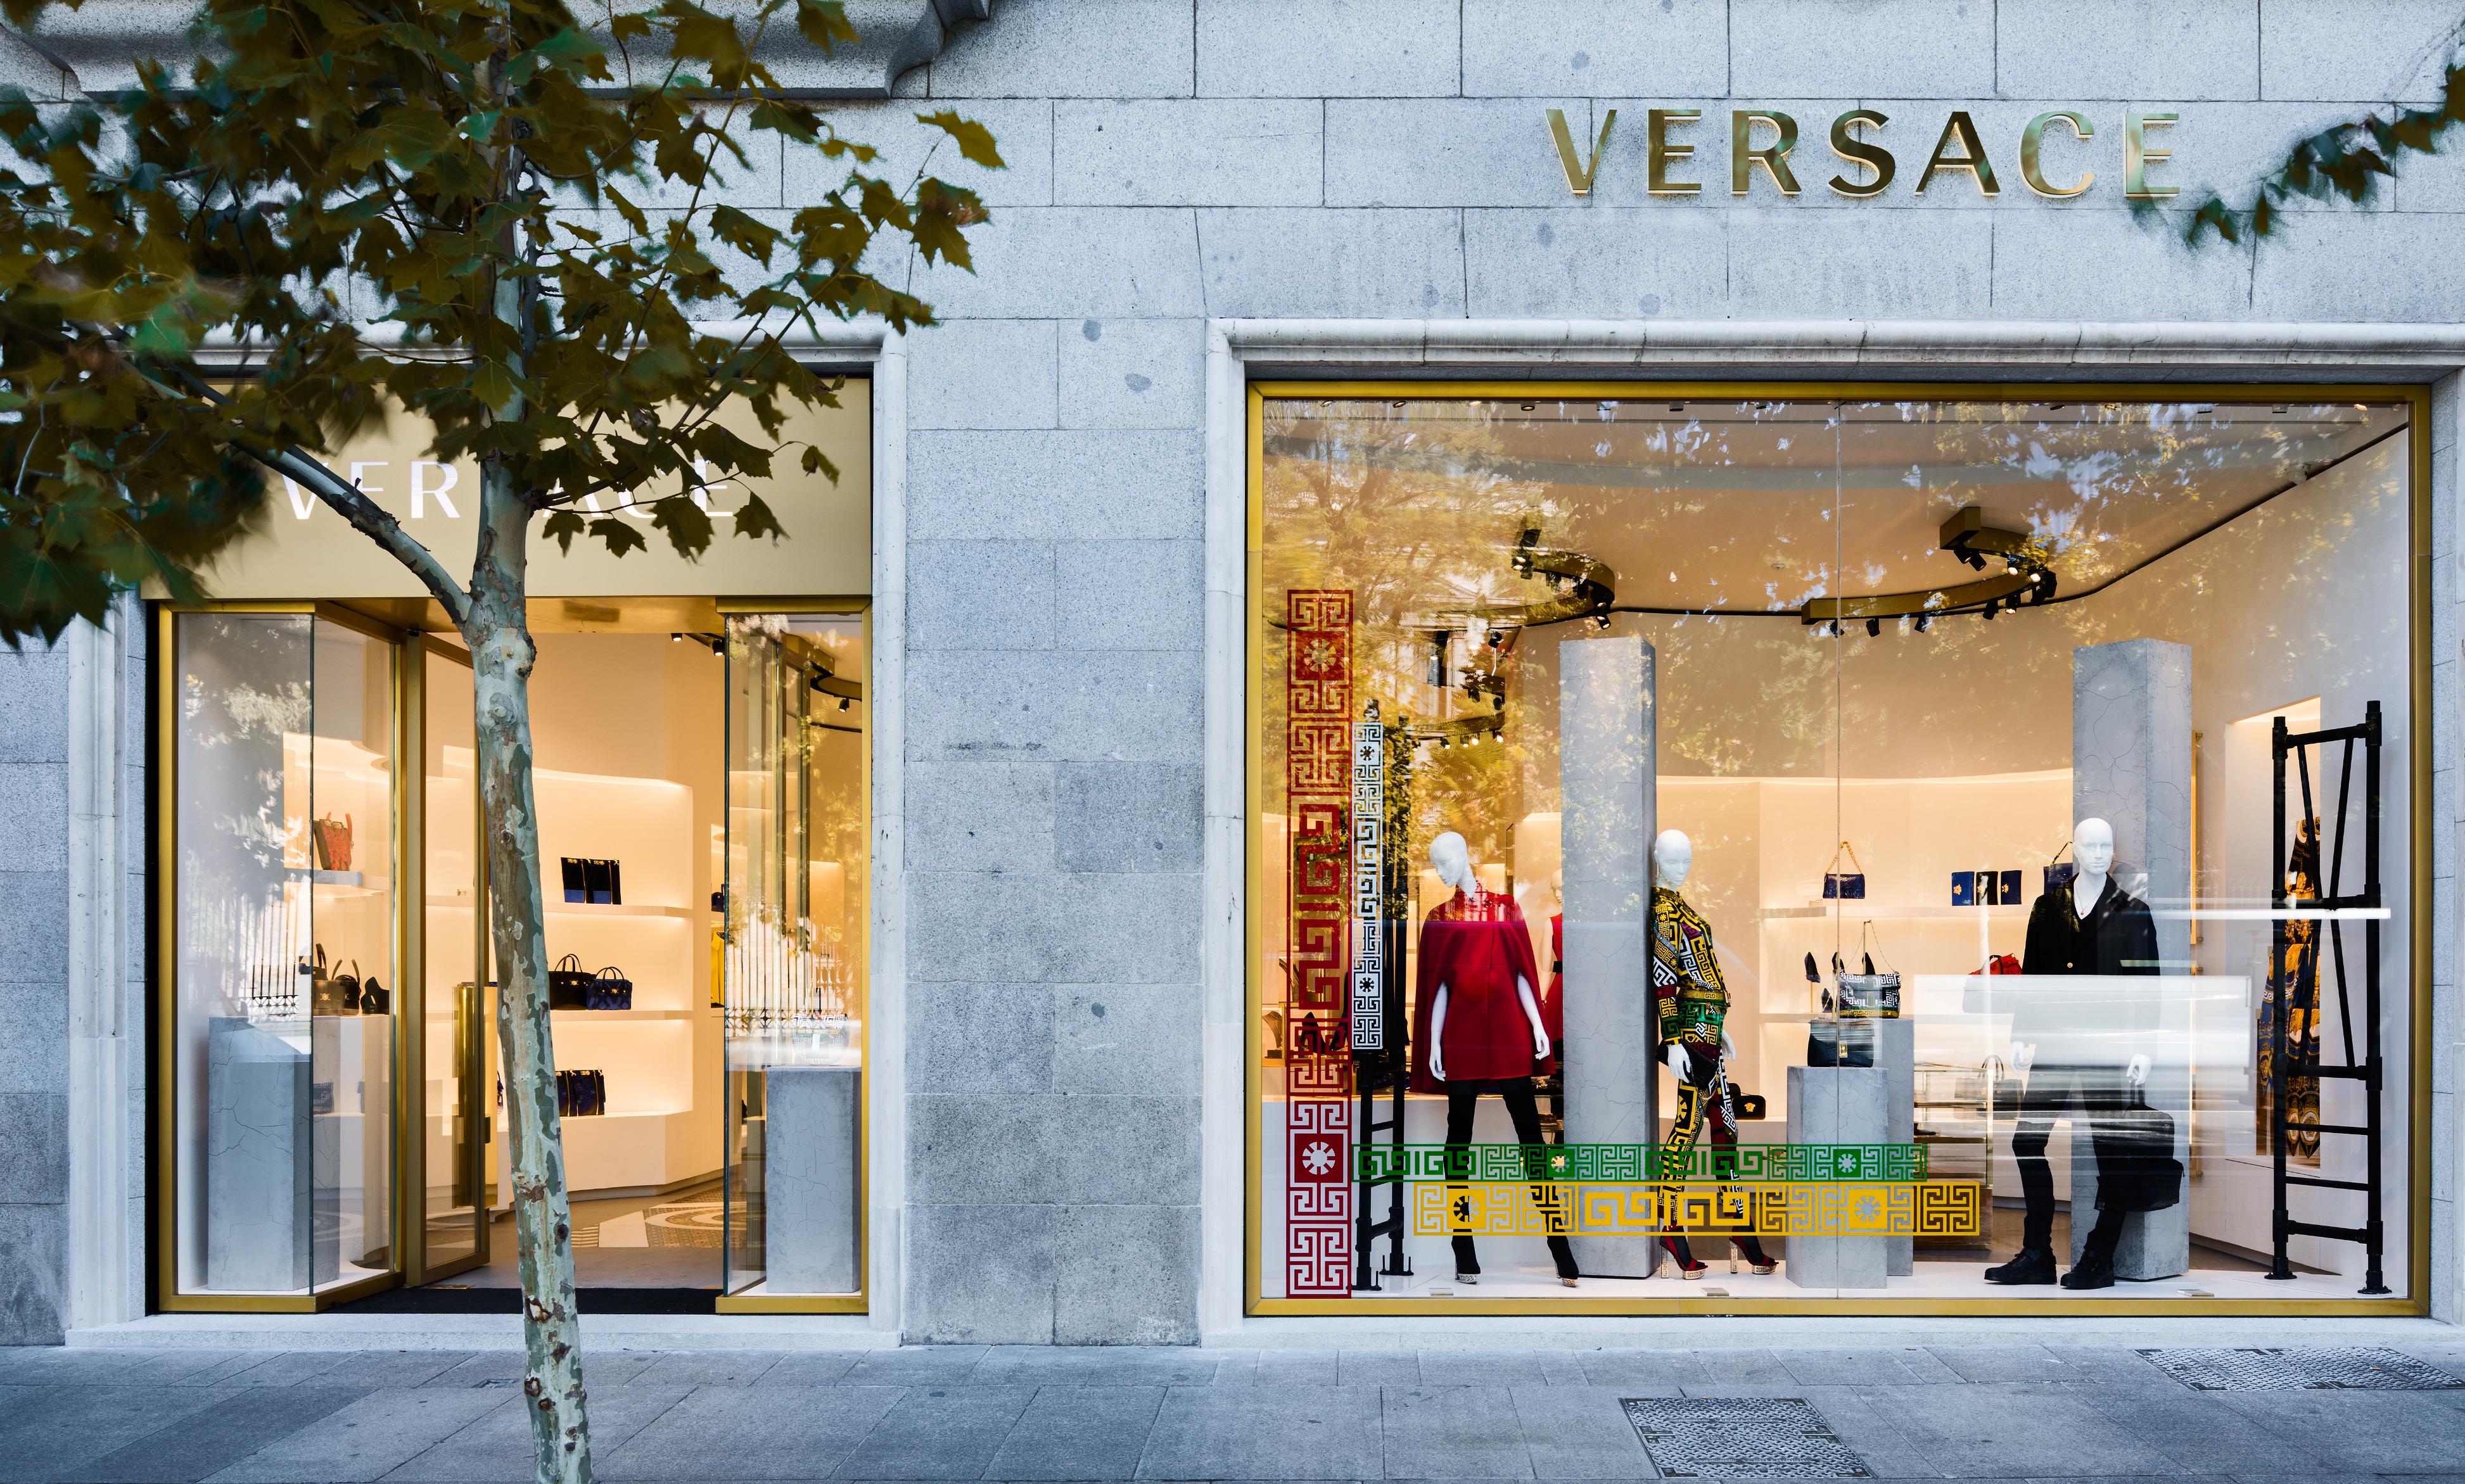 VERSACE on Twitter: "The new #Versace boutique in Madrid celebrates the  dynamism of the Maison and the traditional Italian architecture.  http://t.co/hkKydekhp6" / Twitter